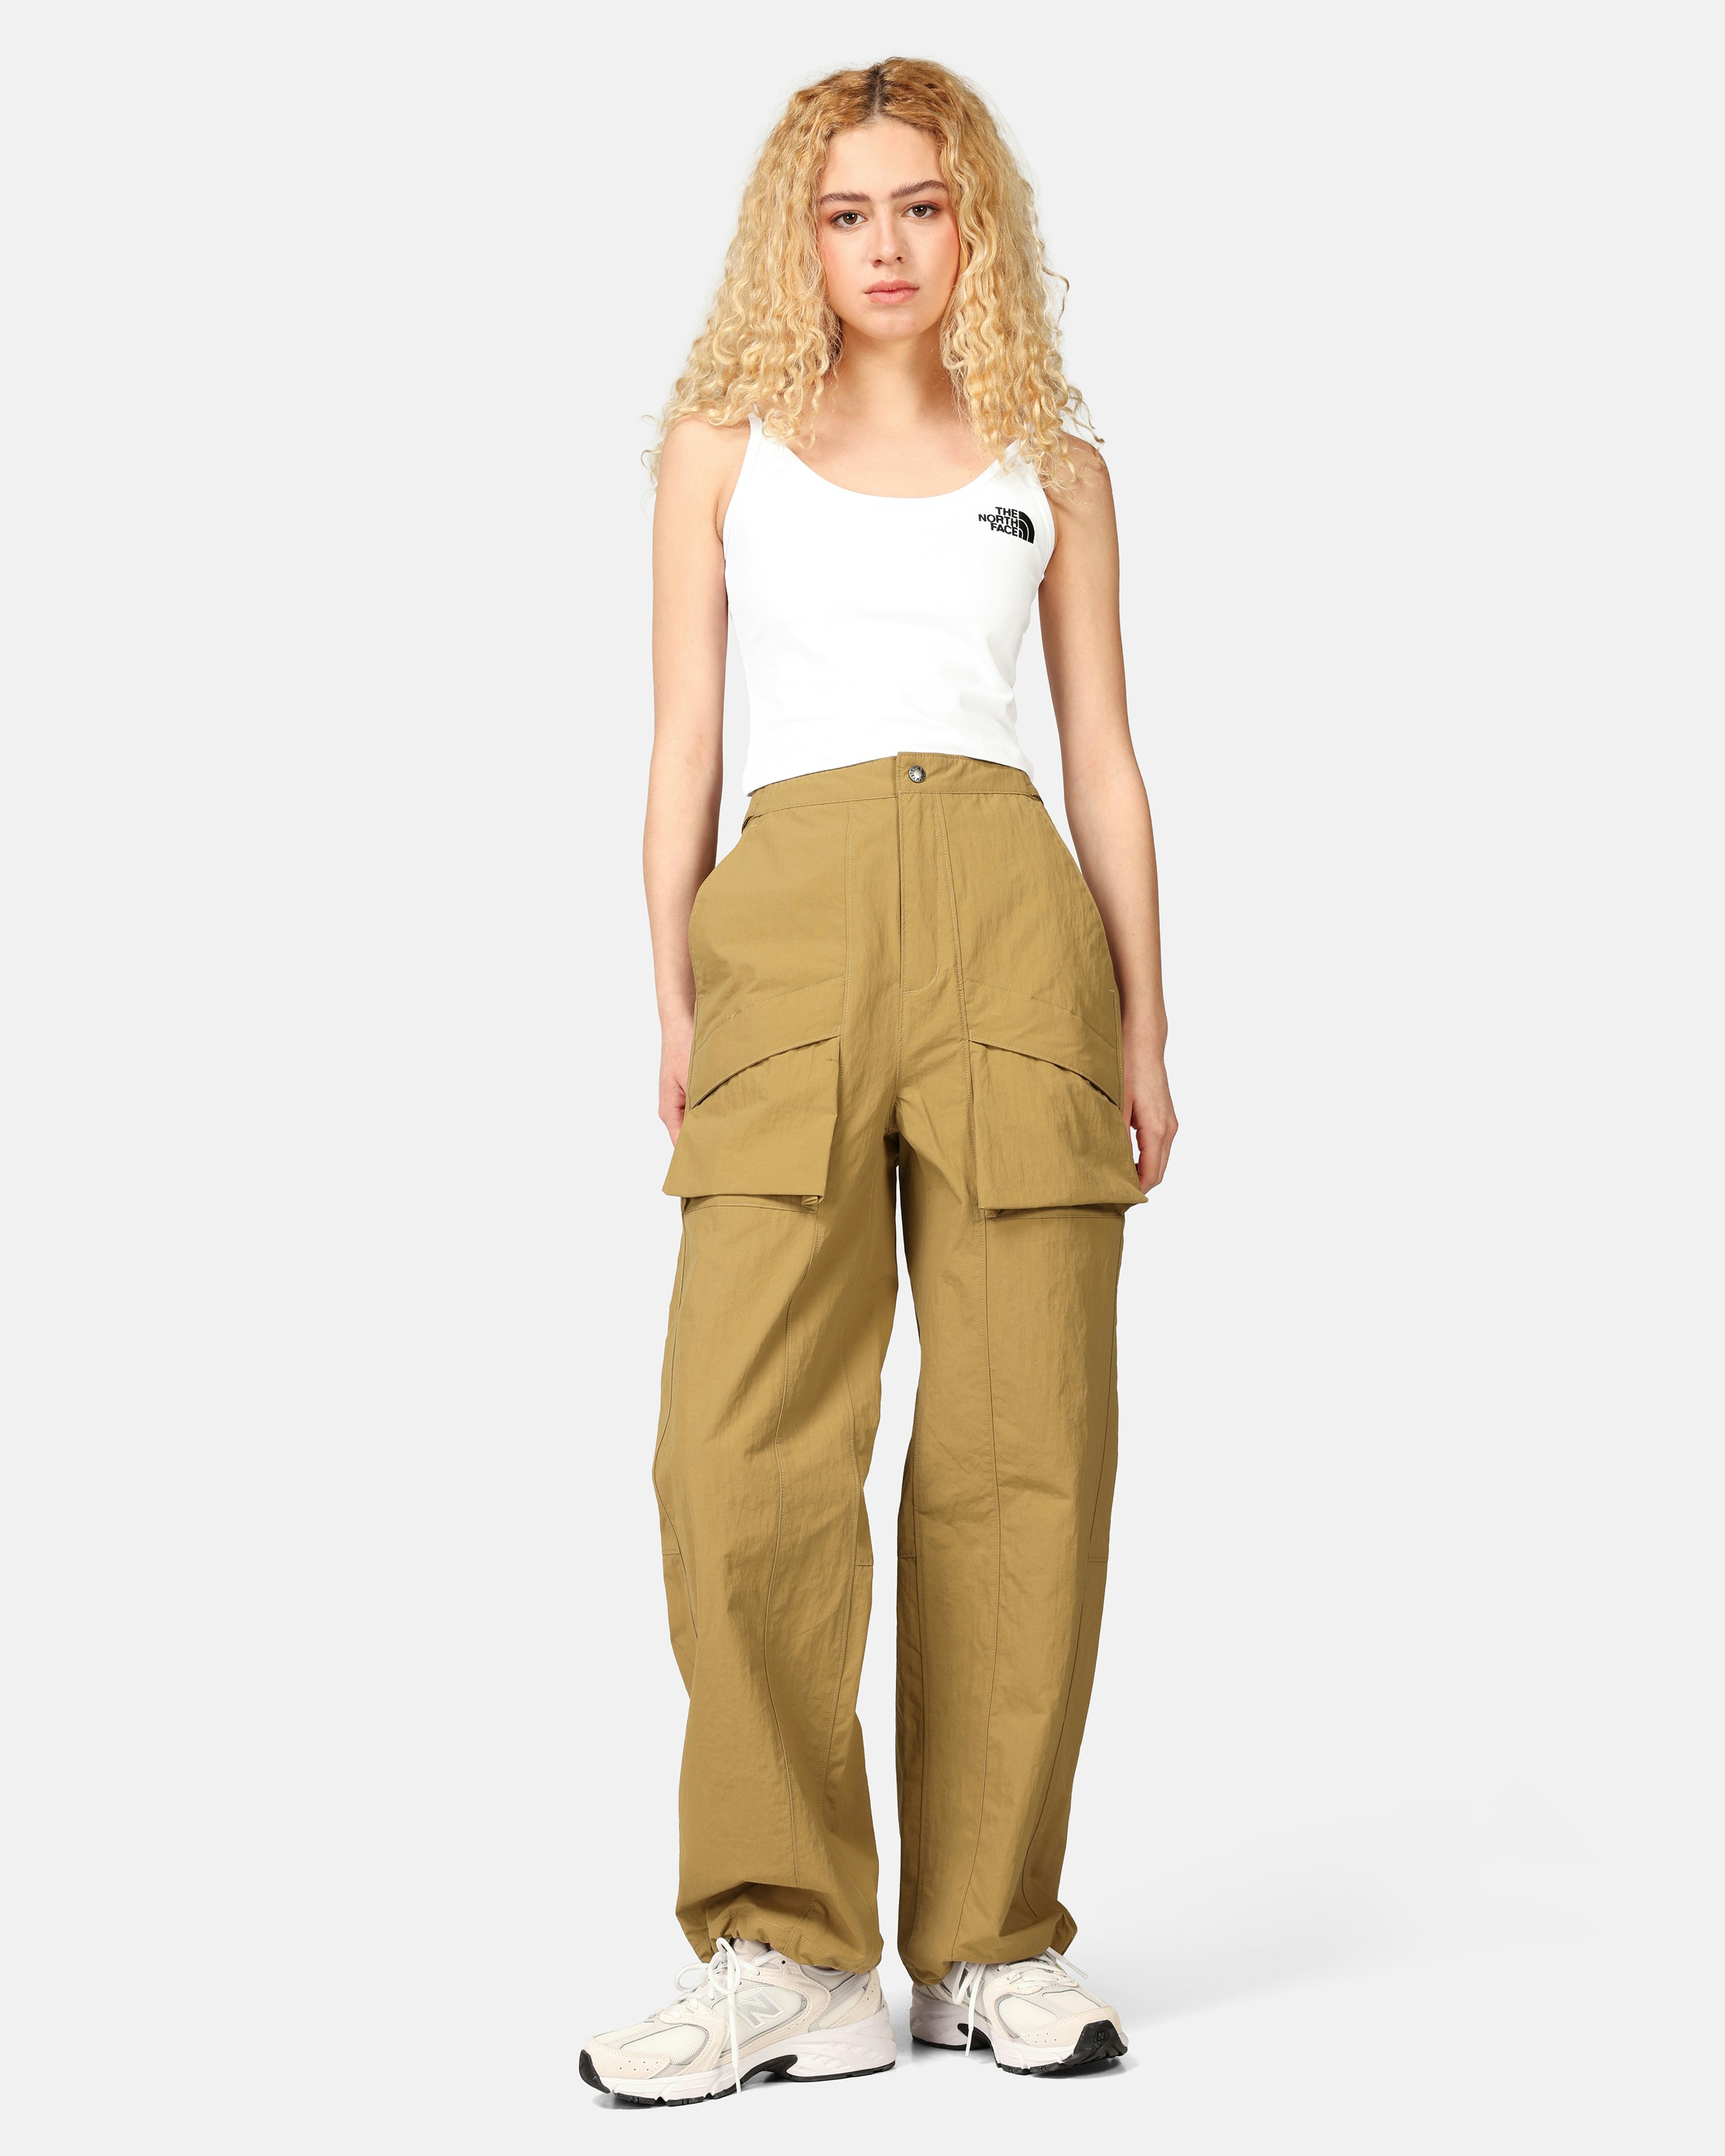 Nike Oversized High-Waisted Woven Cargo Pants Brown, Women